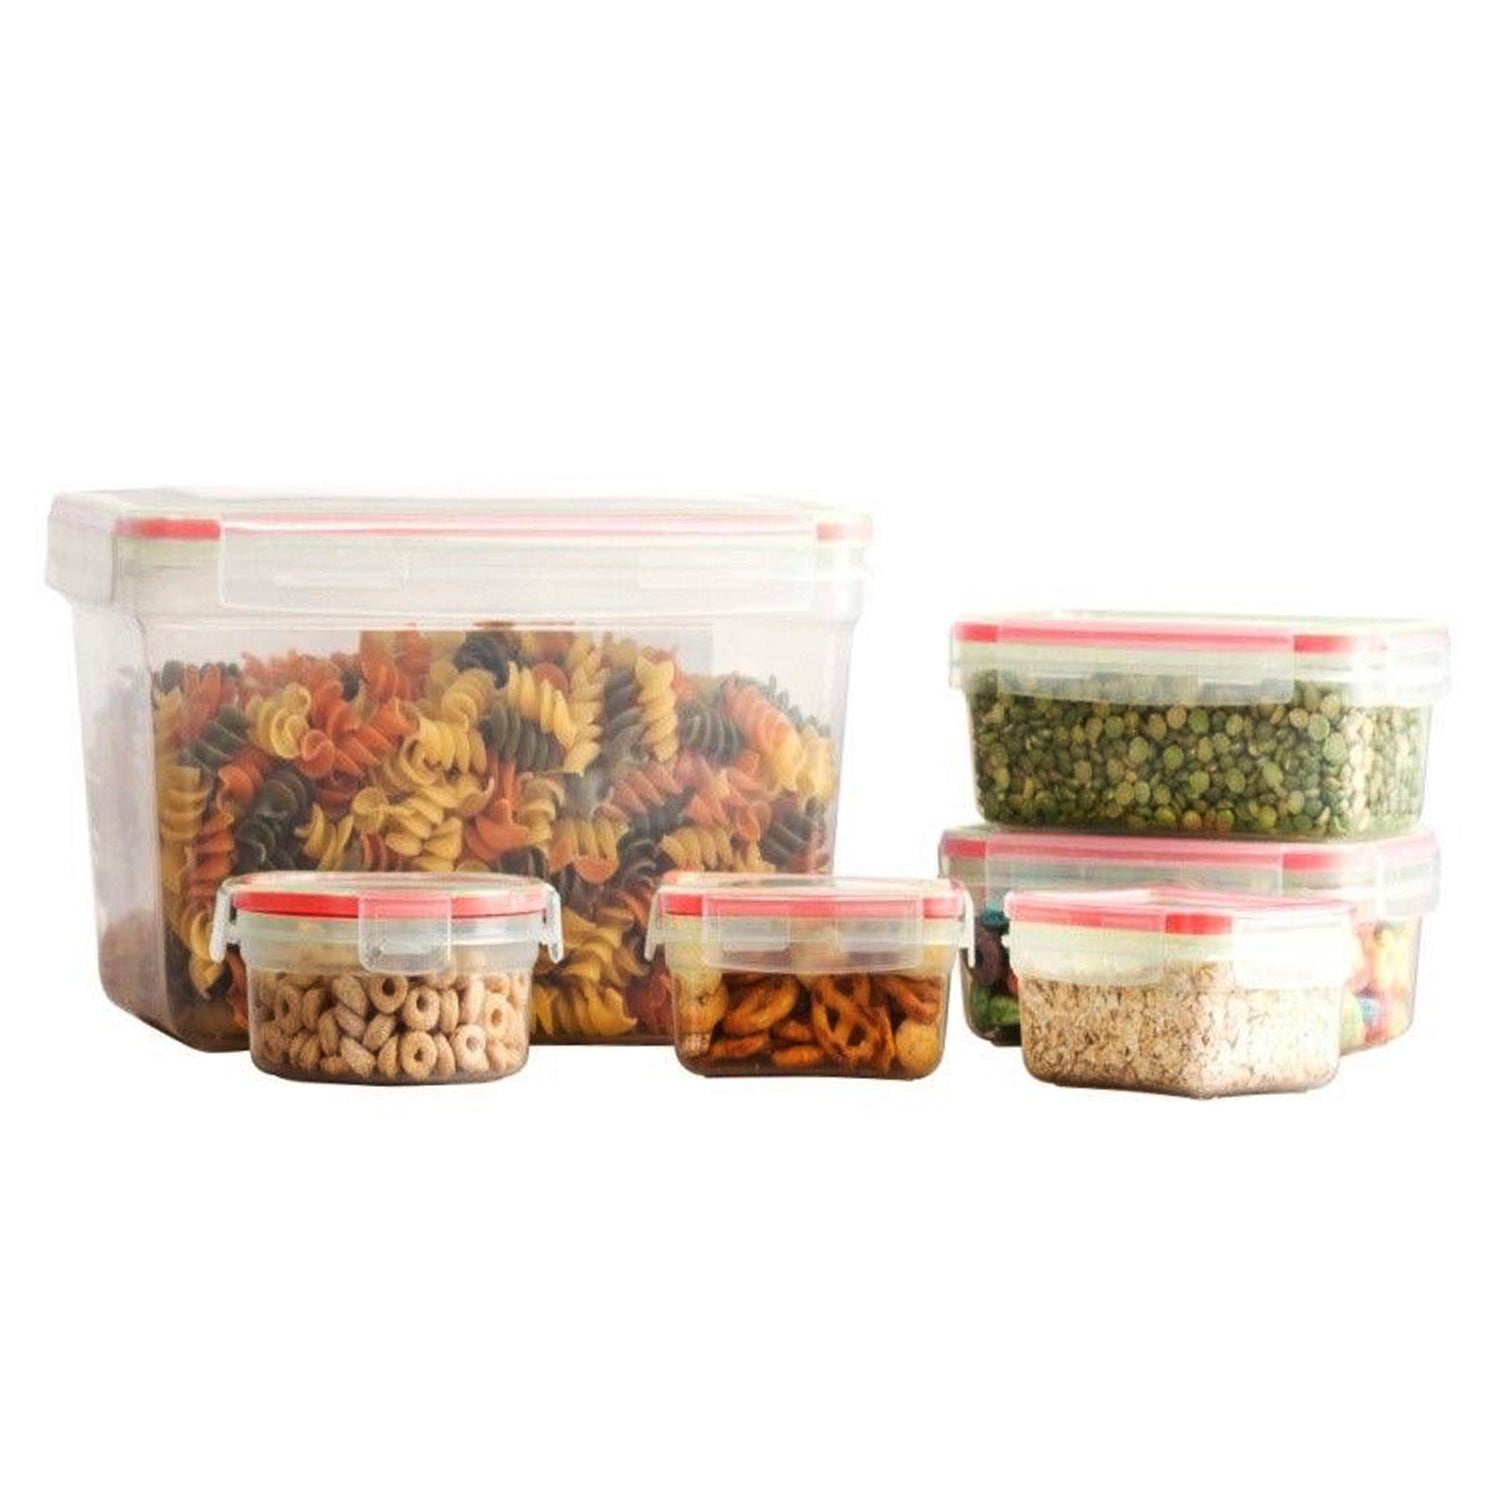 12 Pcs Plastic Mix Food Storage Containers Set With Air Tight Locking Lids